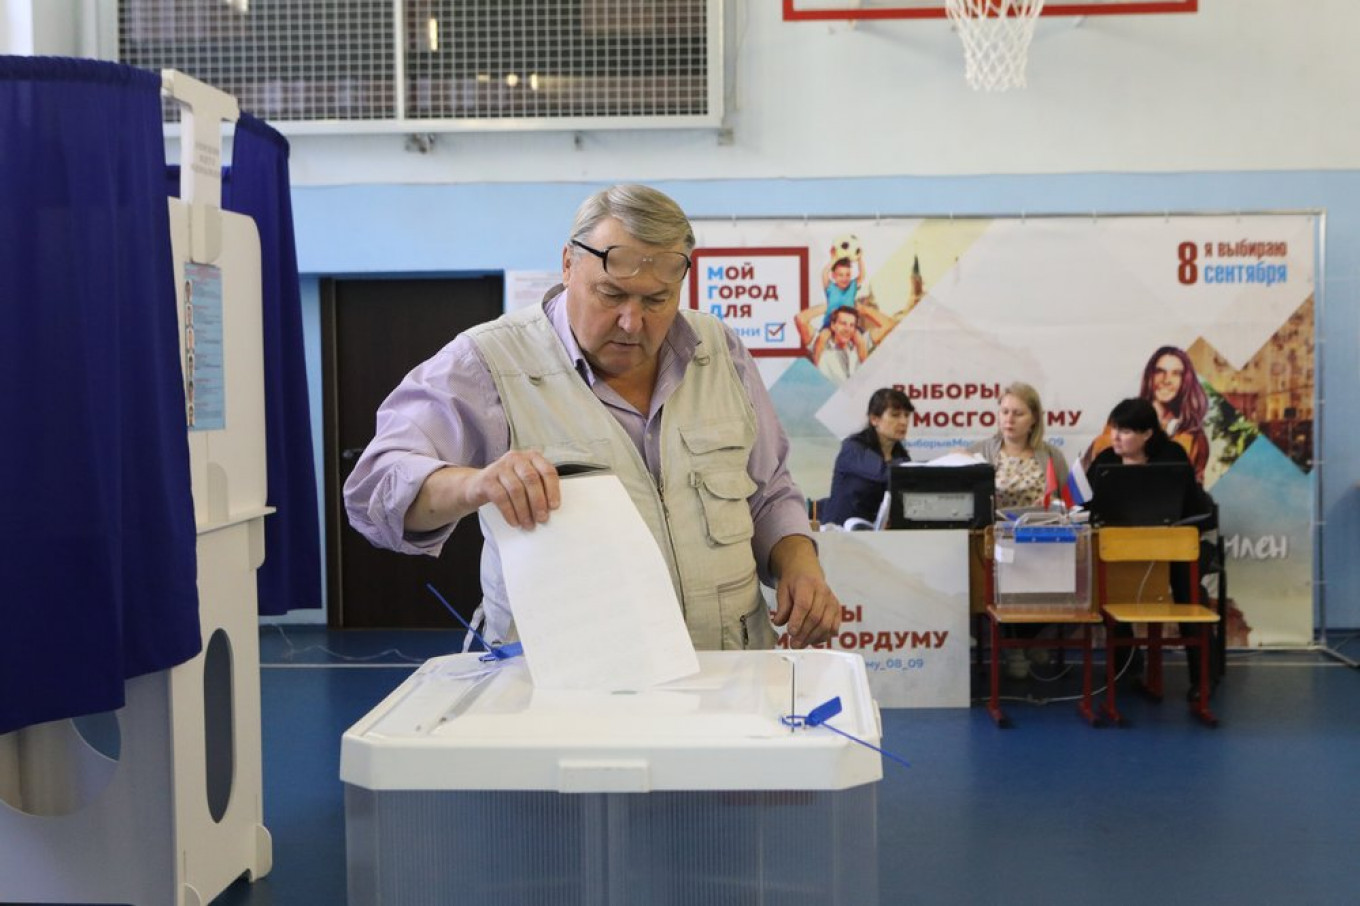 Russia’s Ruling Party Loses a Third of Moscow Election Races After Protests